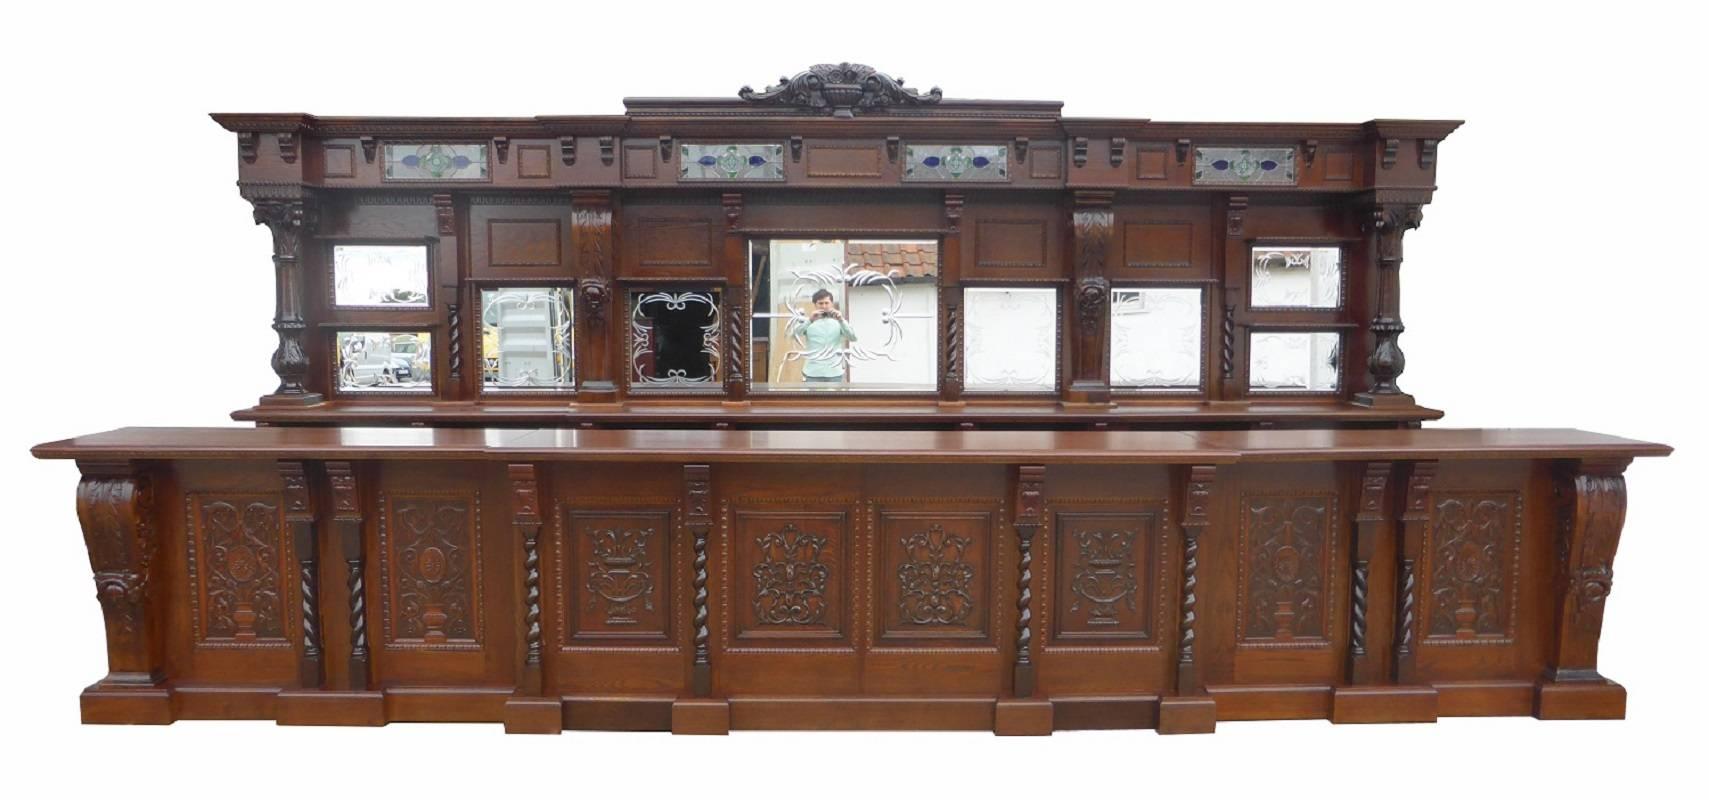 For sale is a superb quality 5 meter (18ft) commercial oak antique style bar. The top of the bar has an intricately carved pediment in the form of a carved urn with flowers. Below this the bar is fitted with four leaded glass panels, separated by